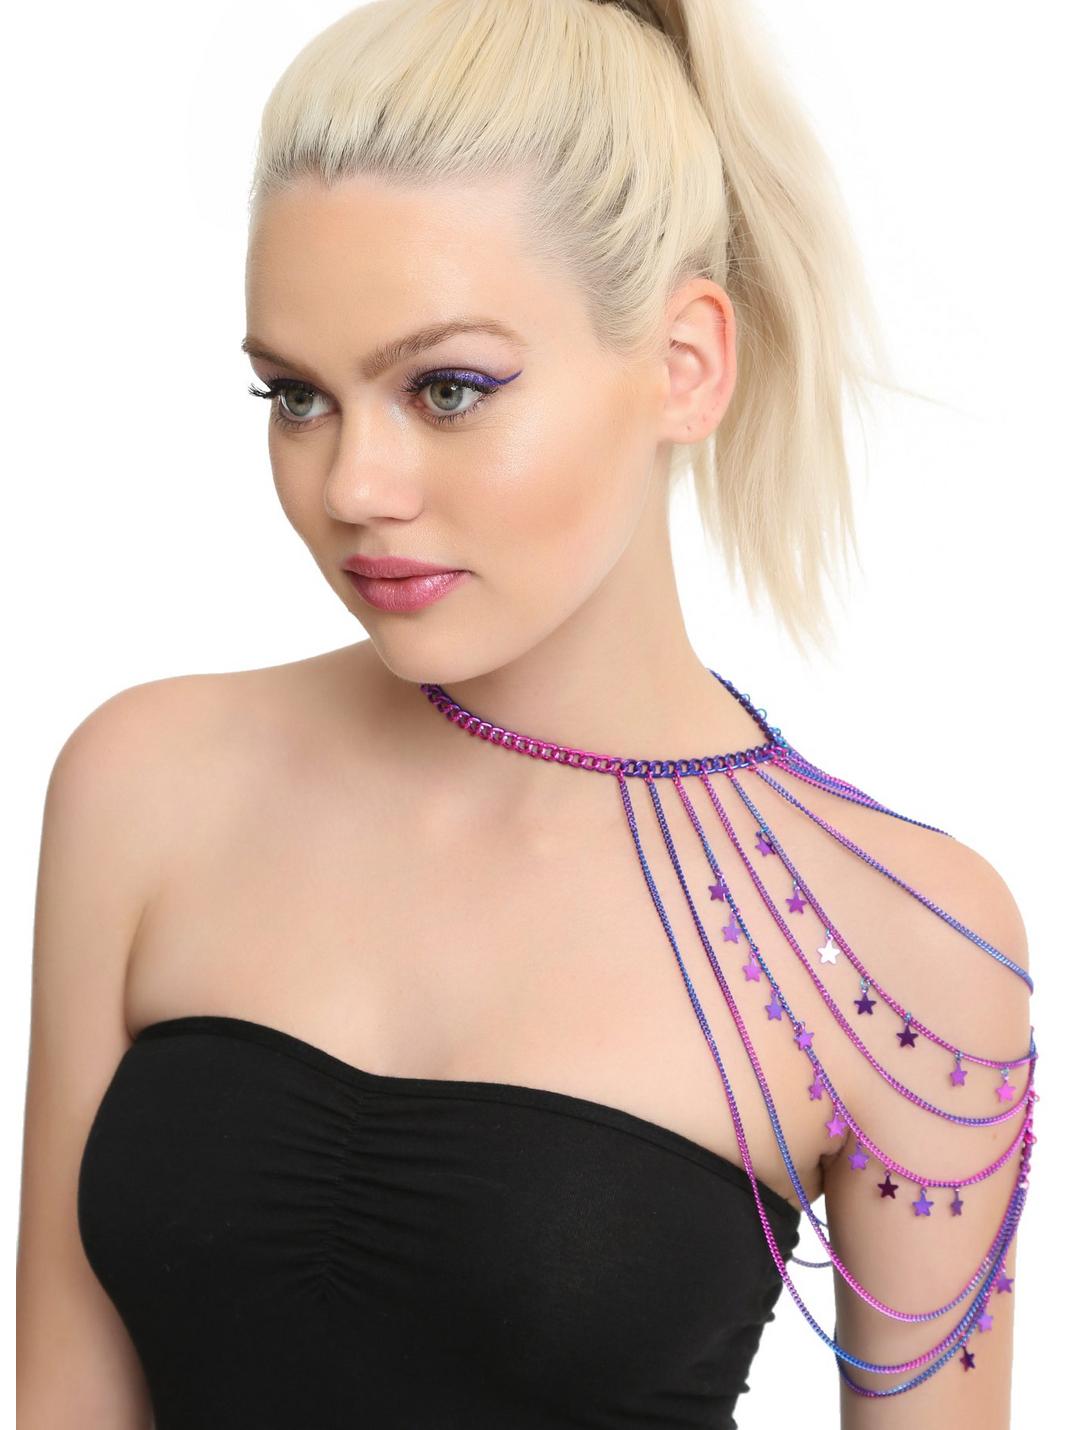 Blackheart Anodized One Shoulder Body Chain, , hi-res